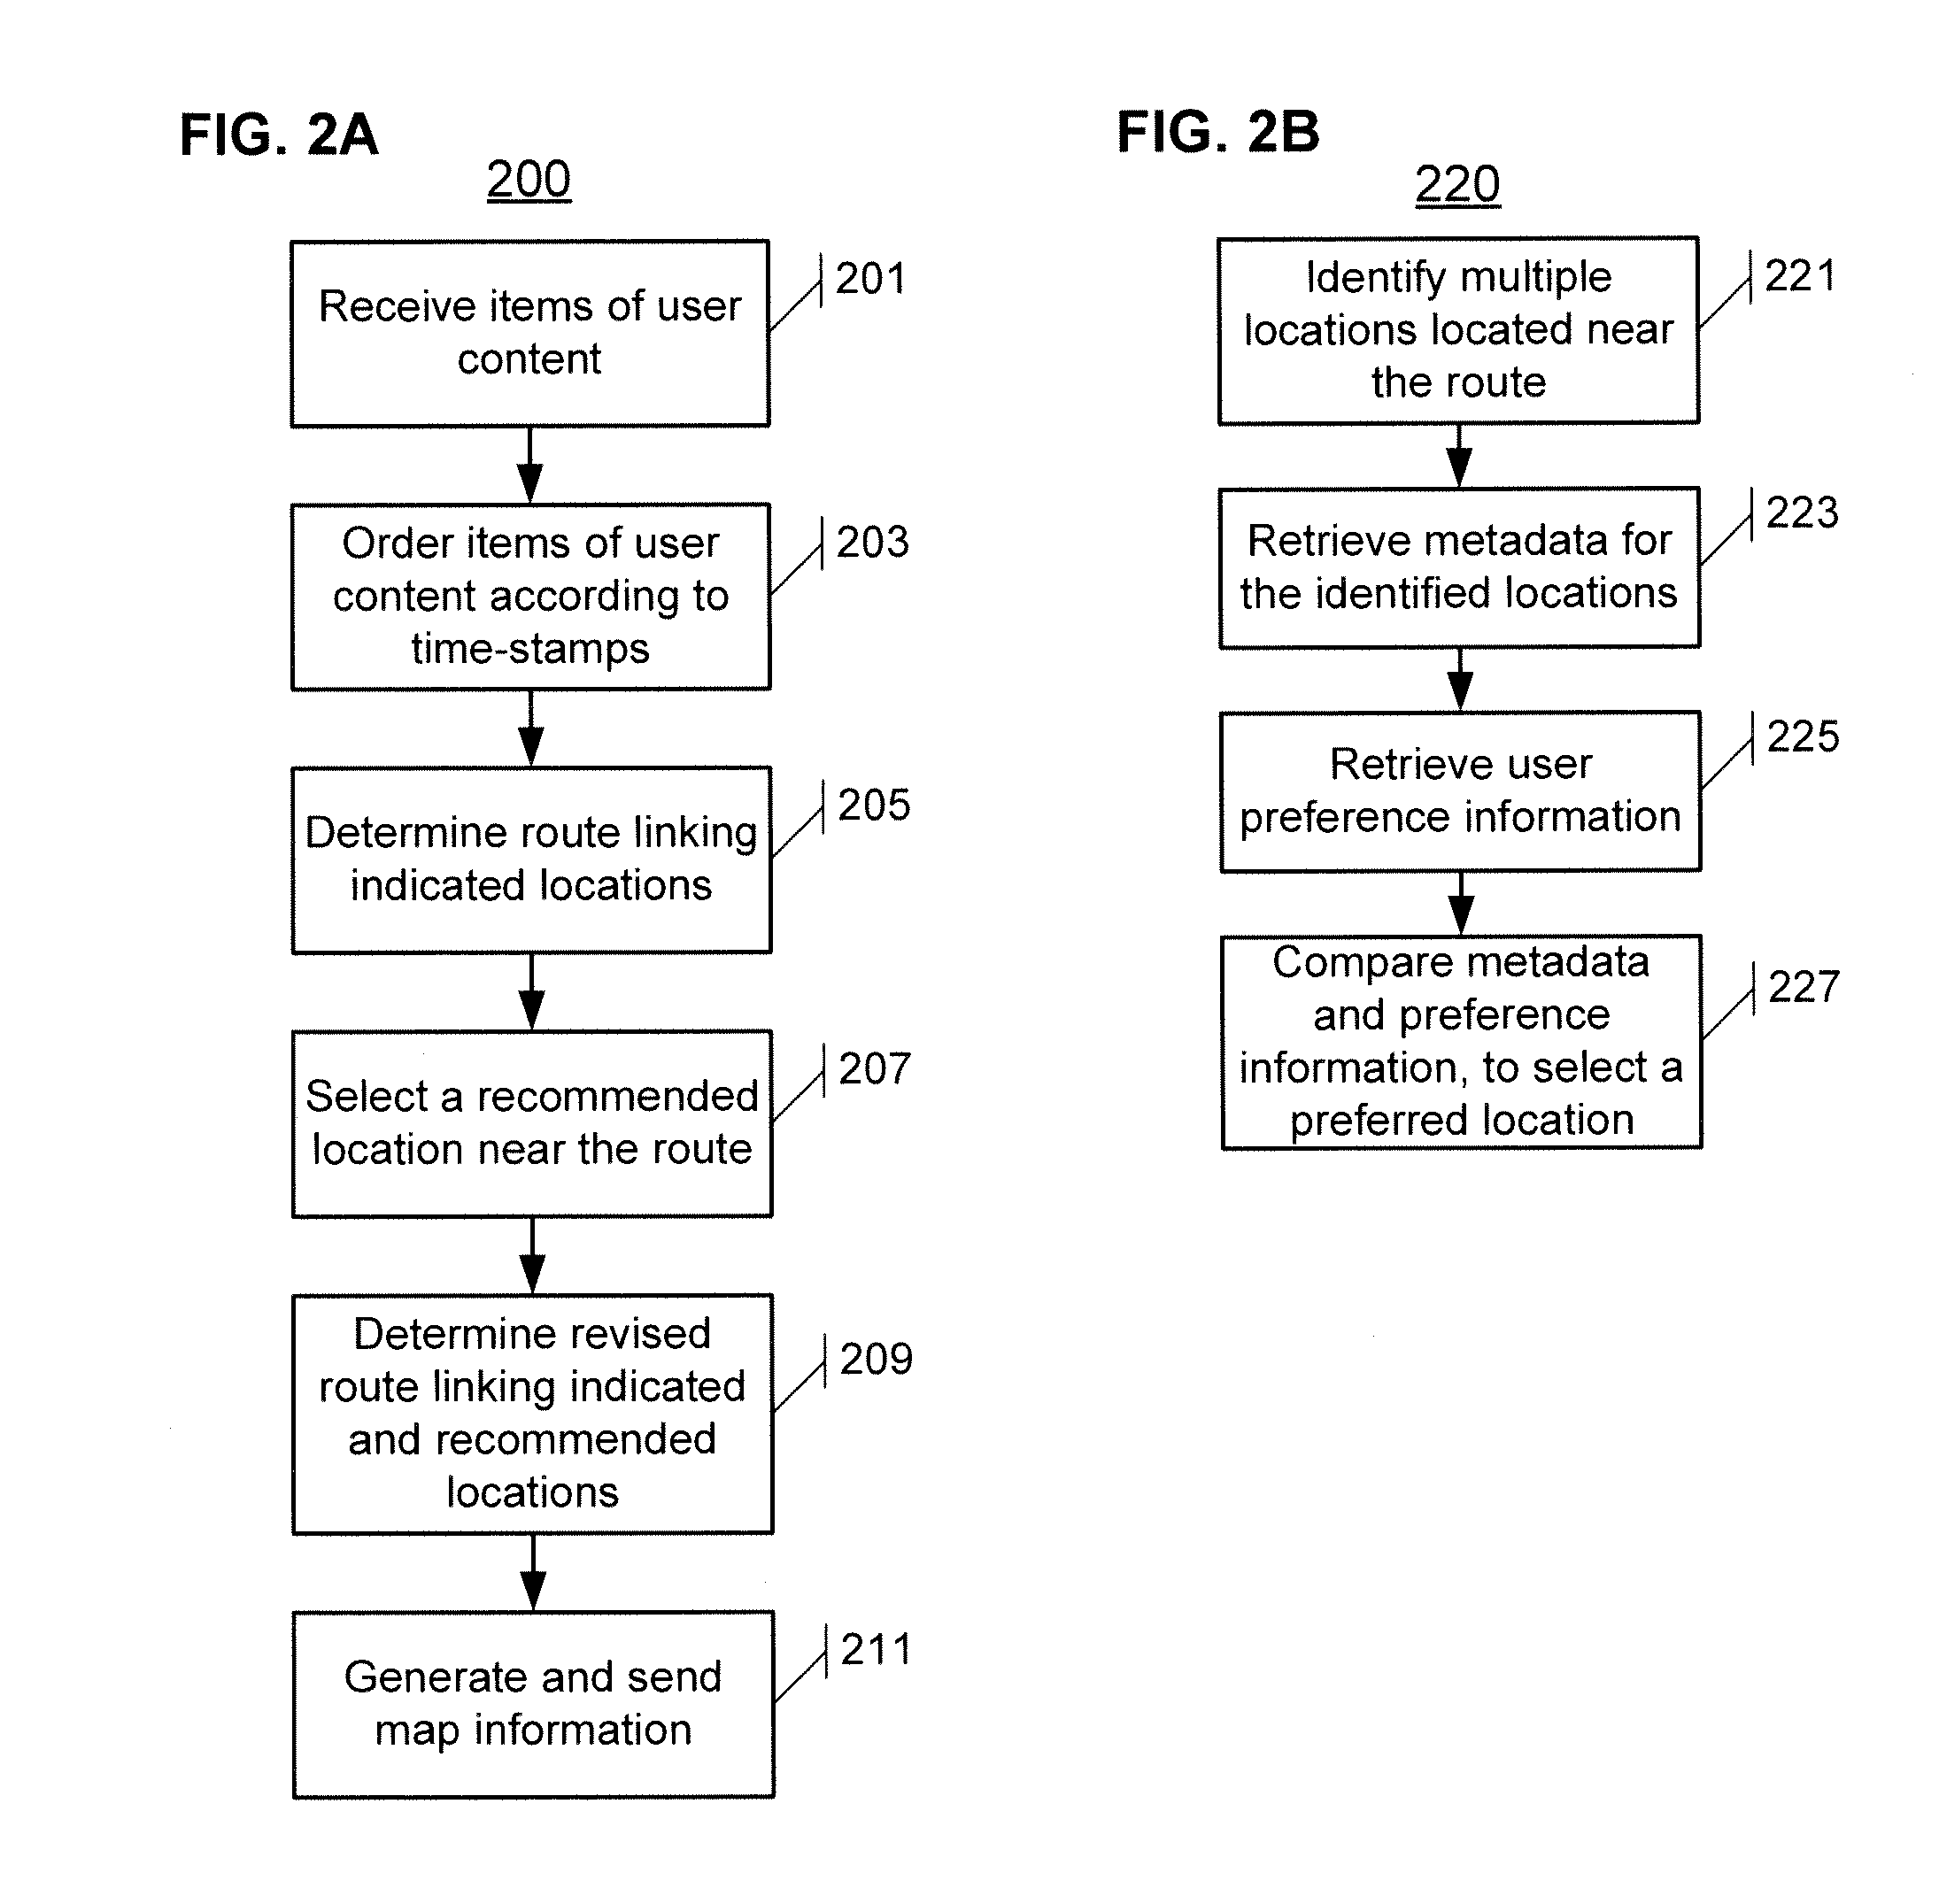 Methods and systems for creating virtual trips from sets of user content items